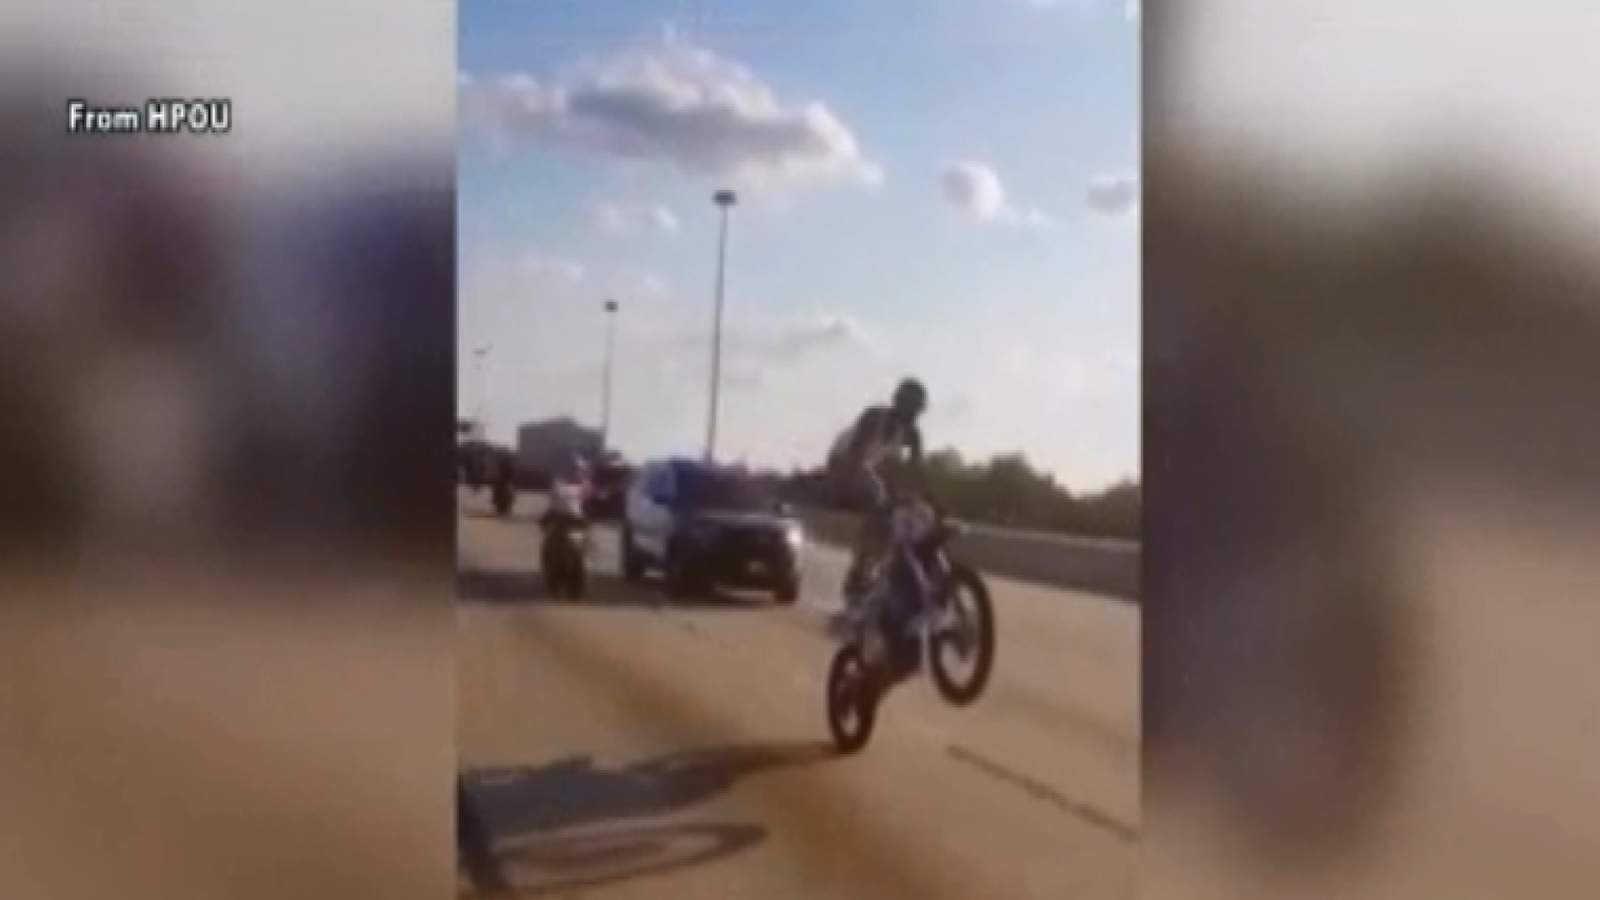 Houston police search for motorcycle riders seen in viral video appearing to taunt officers